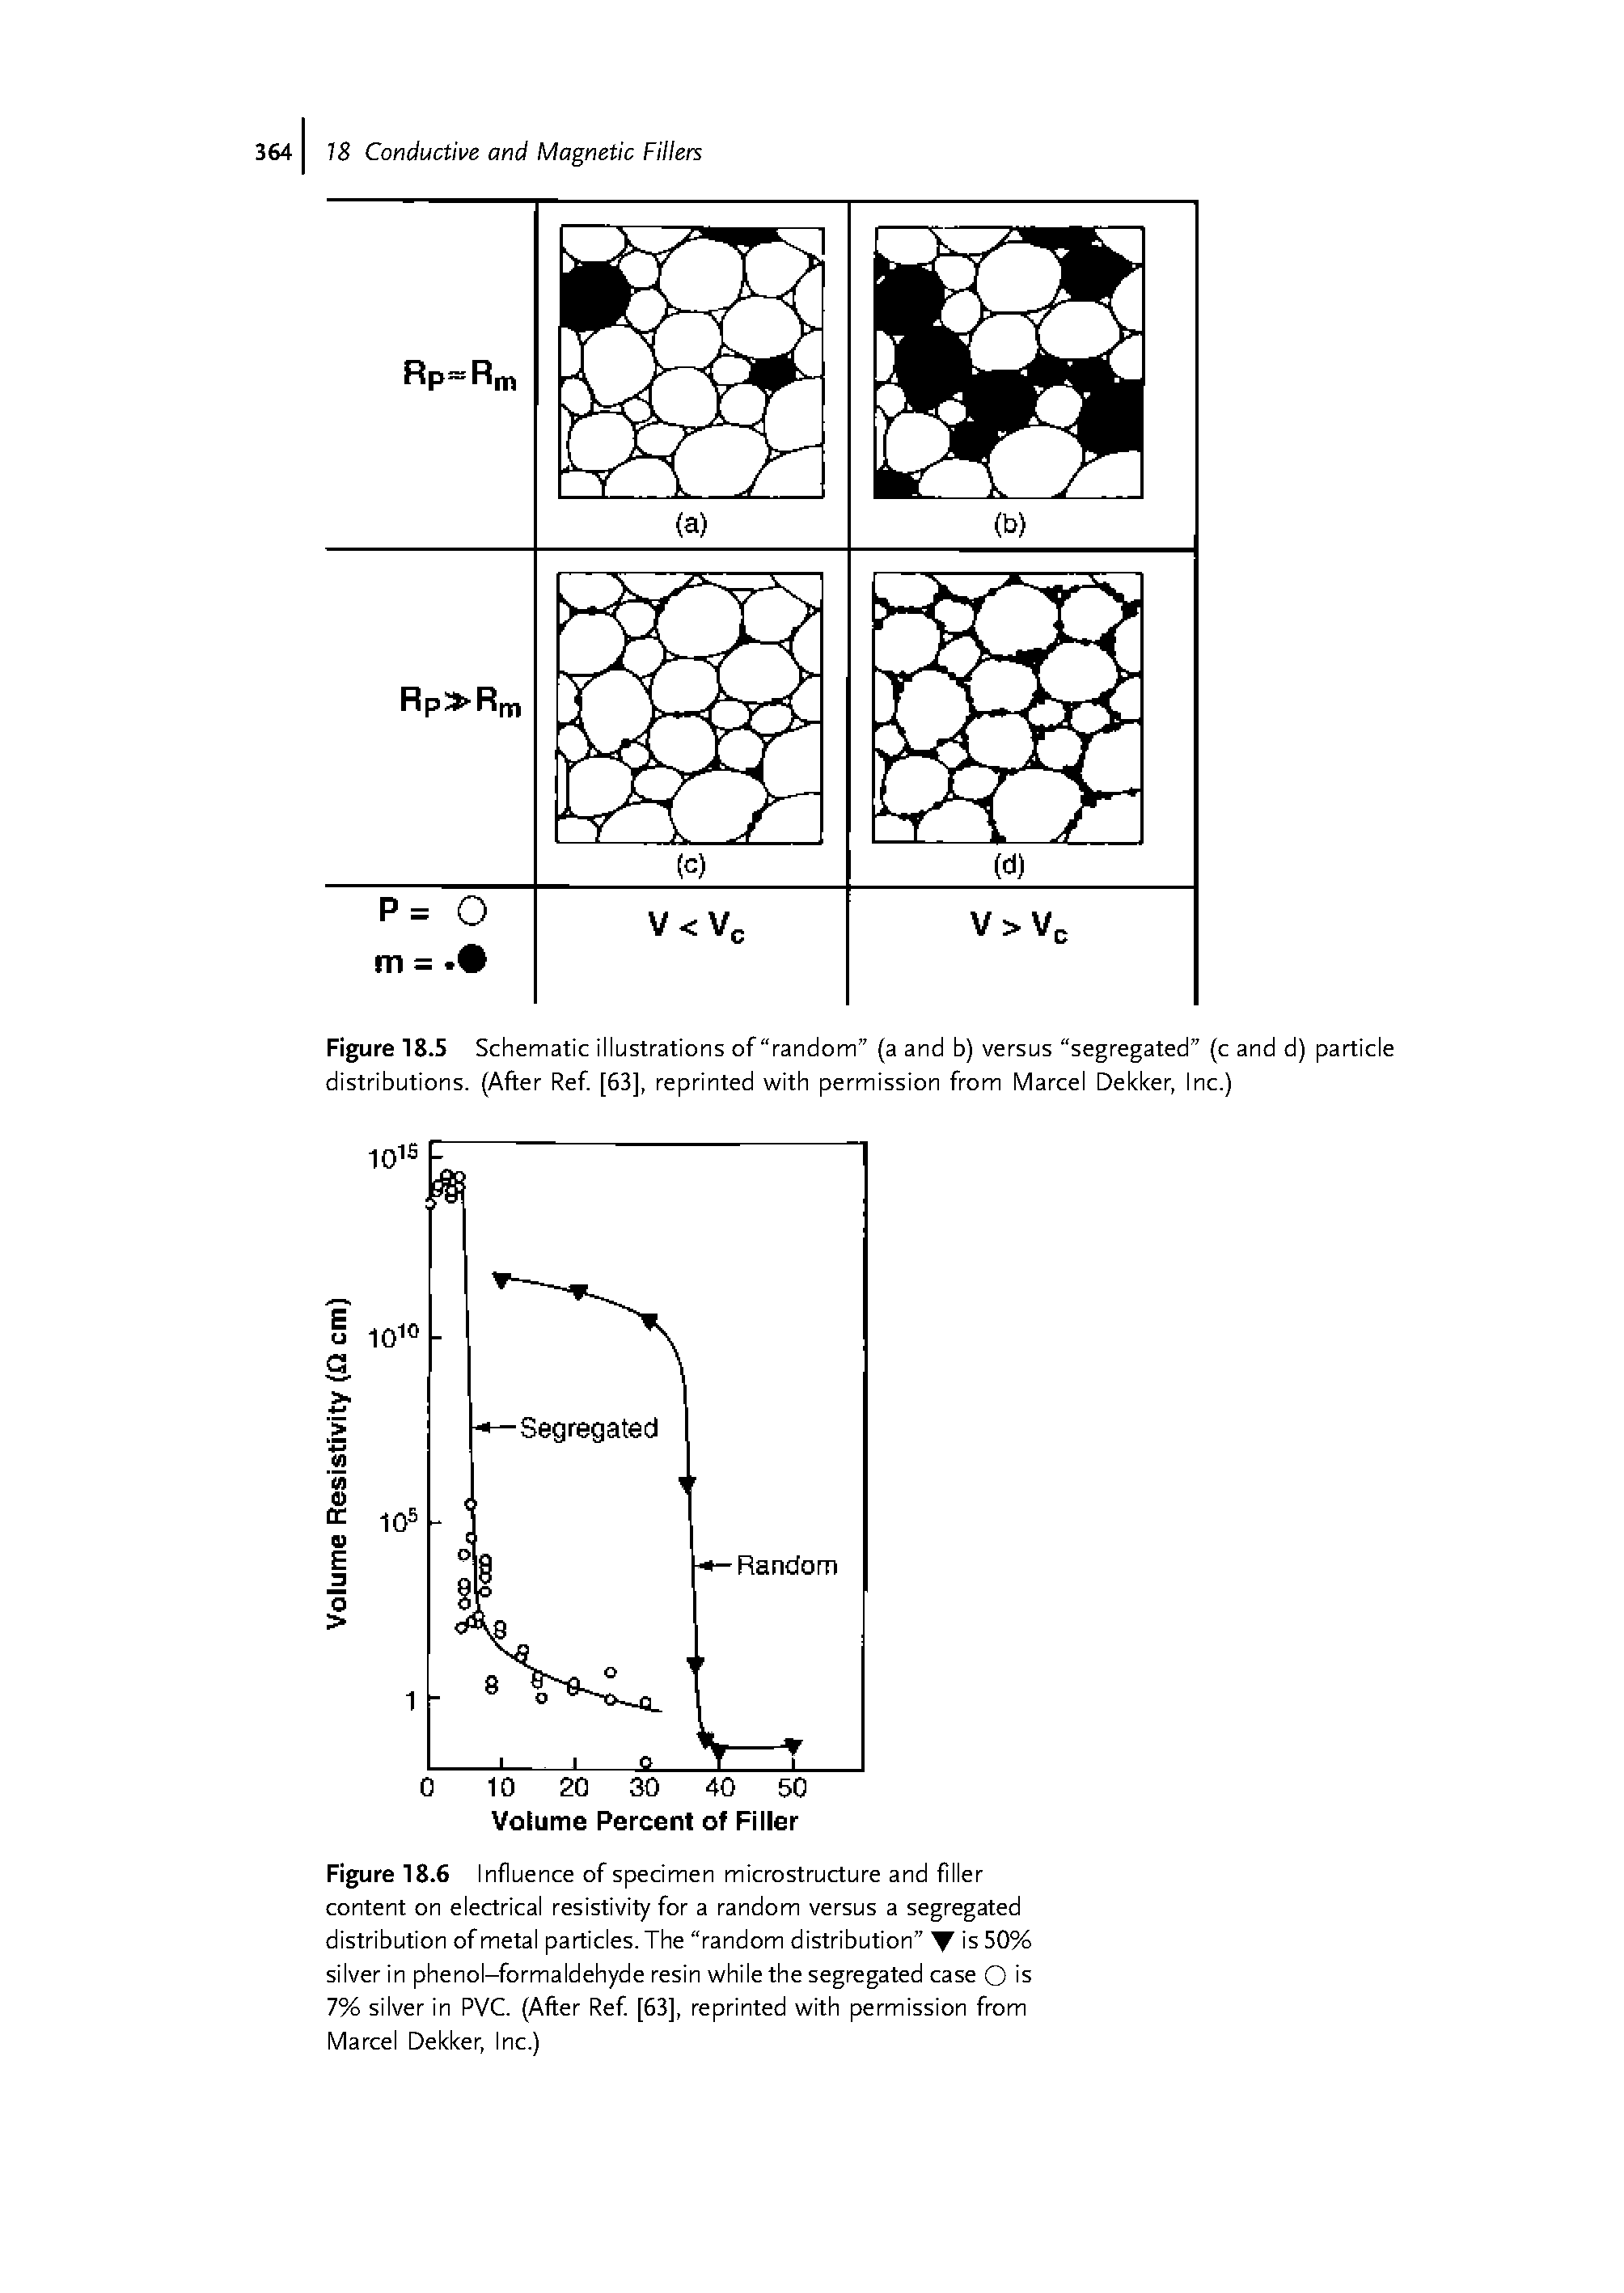 Figure 18.6 Influence of specimen microstructure and filler content on electrical resistivity for a random versus a segregated distribution of metal particles. The random distribution is 50% silver in phenol-formaldehyde resin while the segregated case O is 7% silver in PVC. (After Ref [63], reprinted with permission from Marcel Dekker, Inc.)...